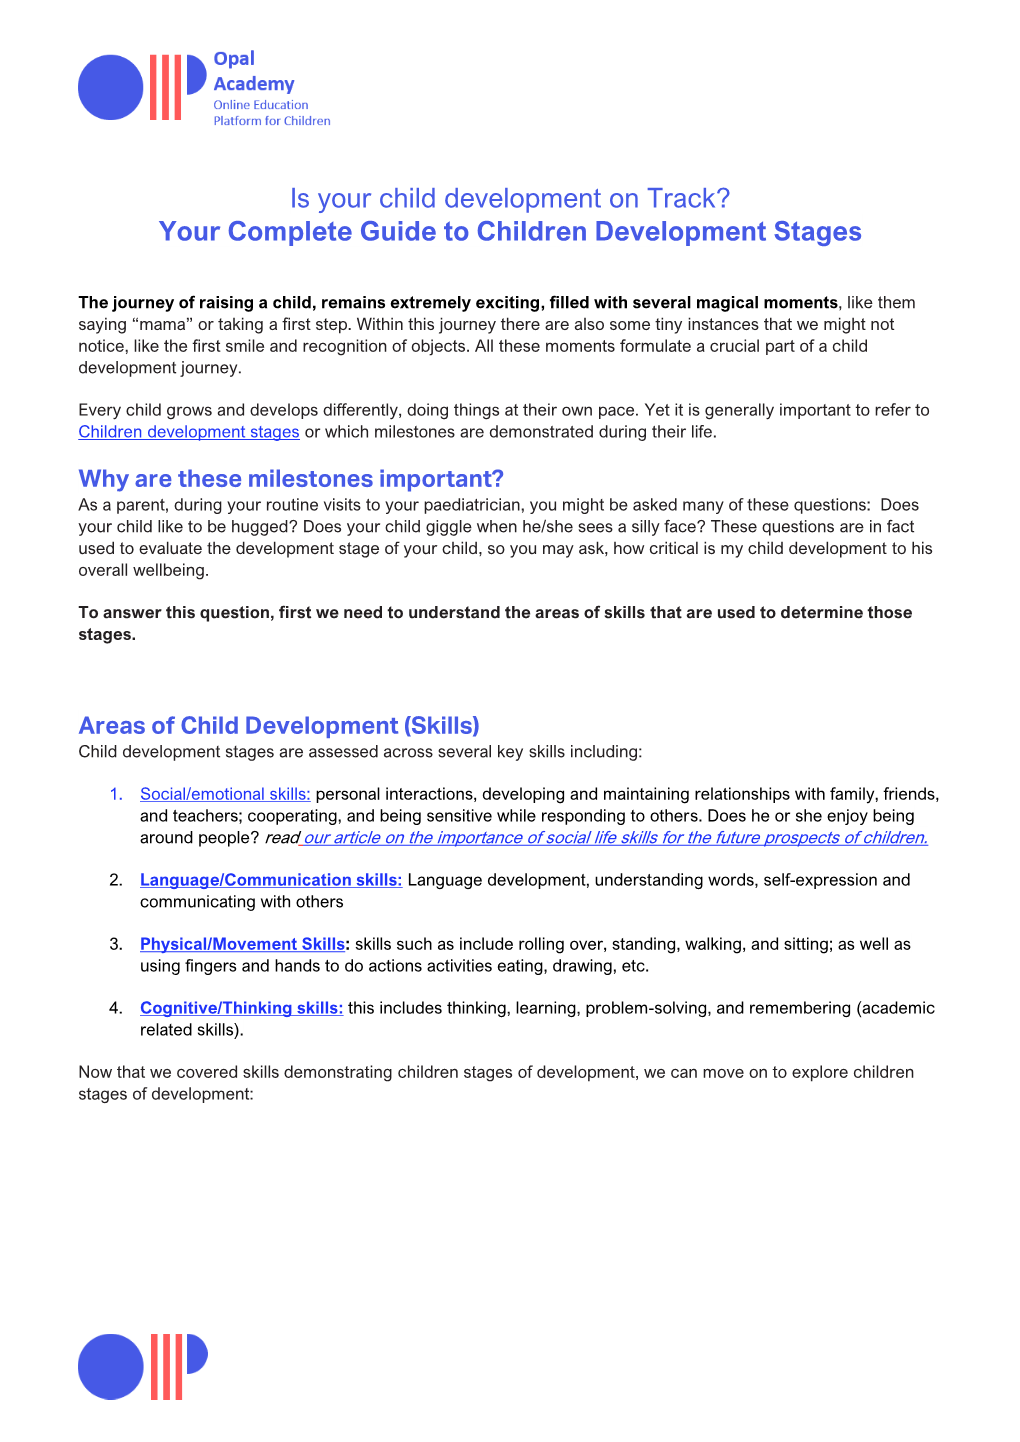 Your Complete Guide to Children Development Stages